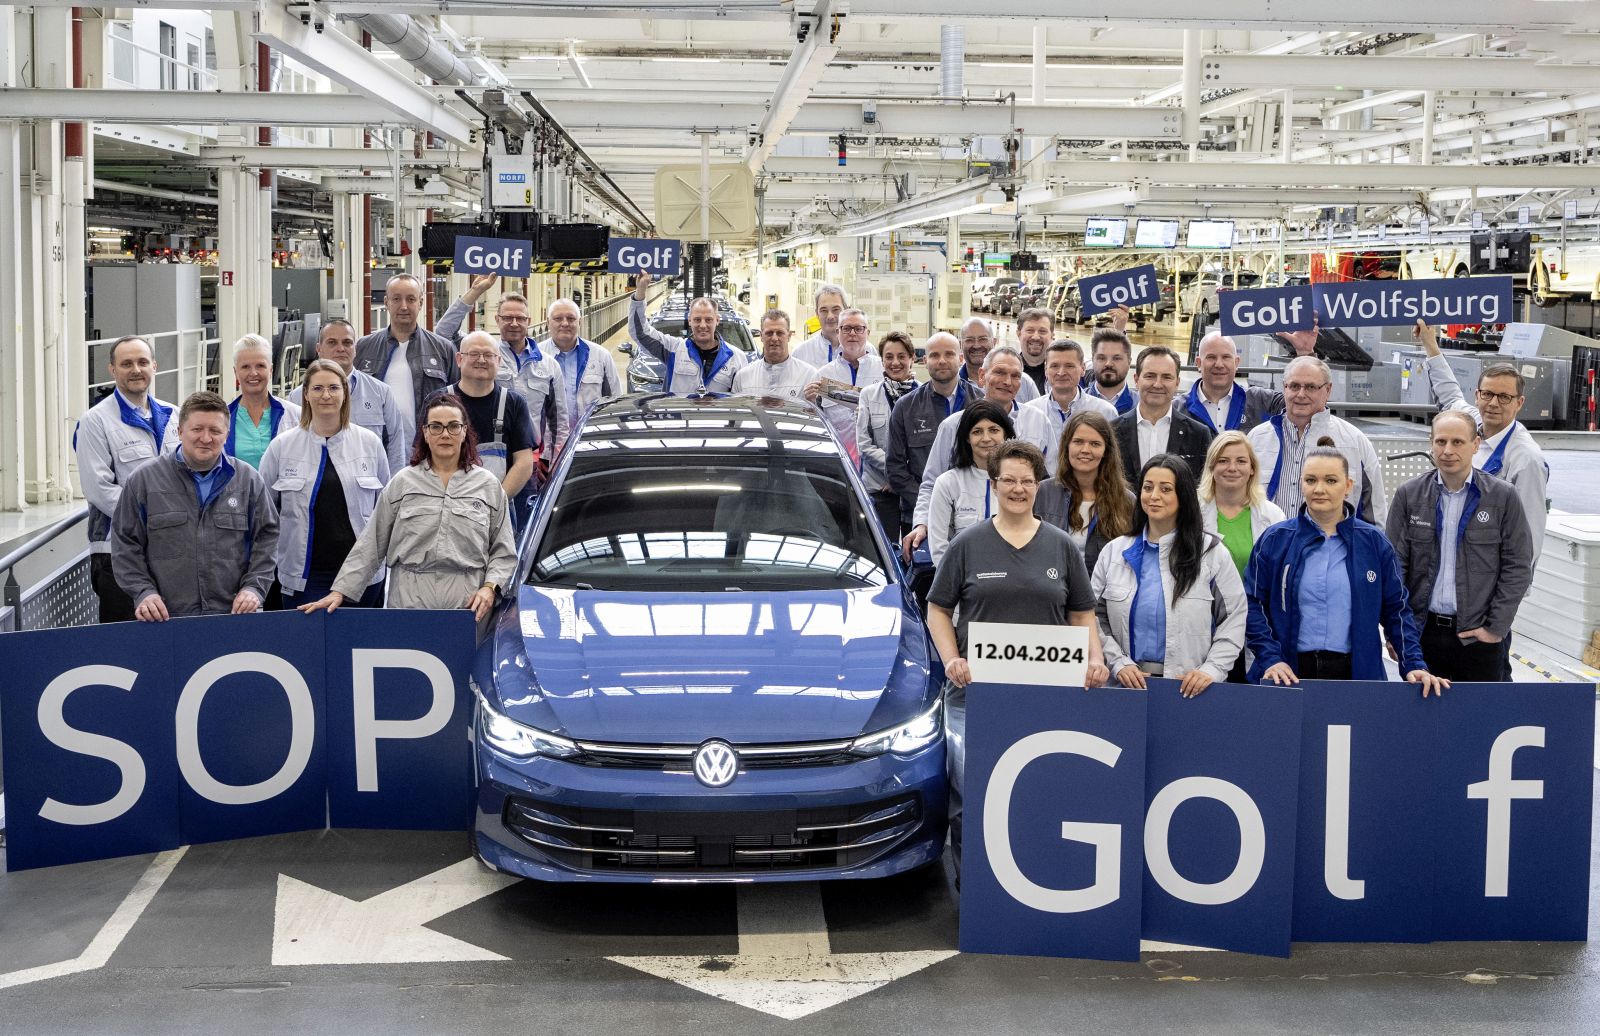 New Golf starts rolling off assembly line at Wolfsburg plant.